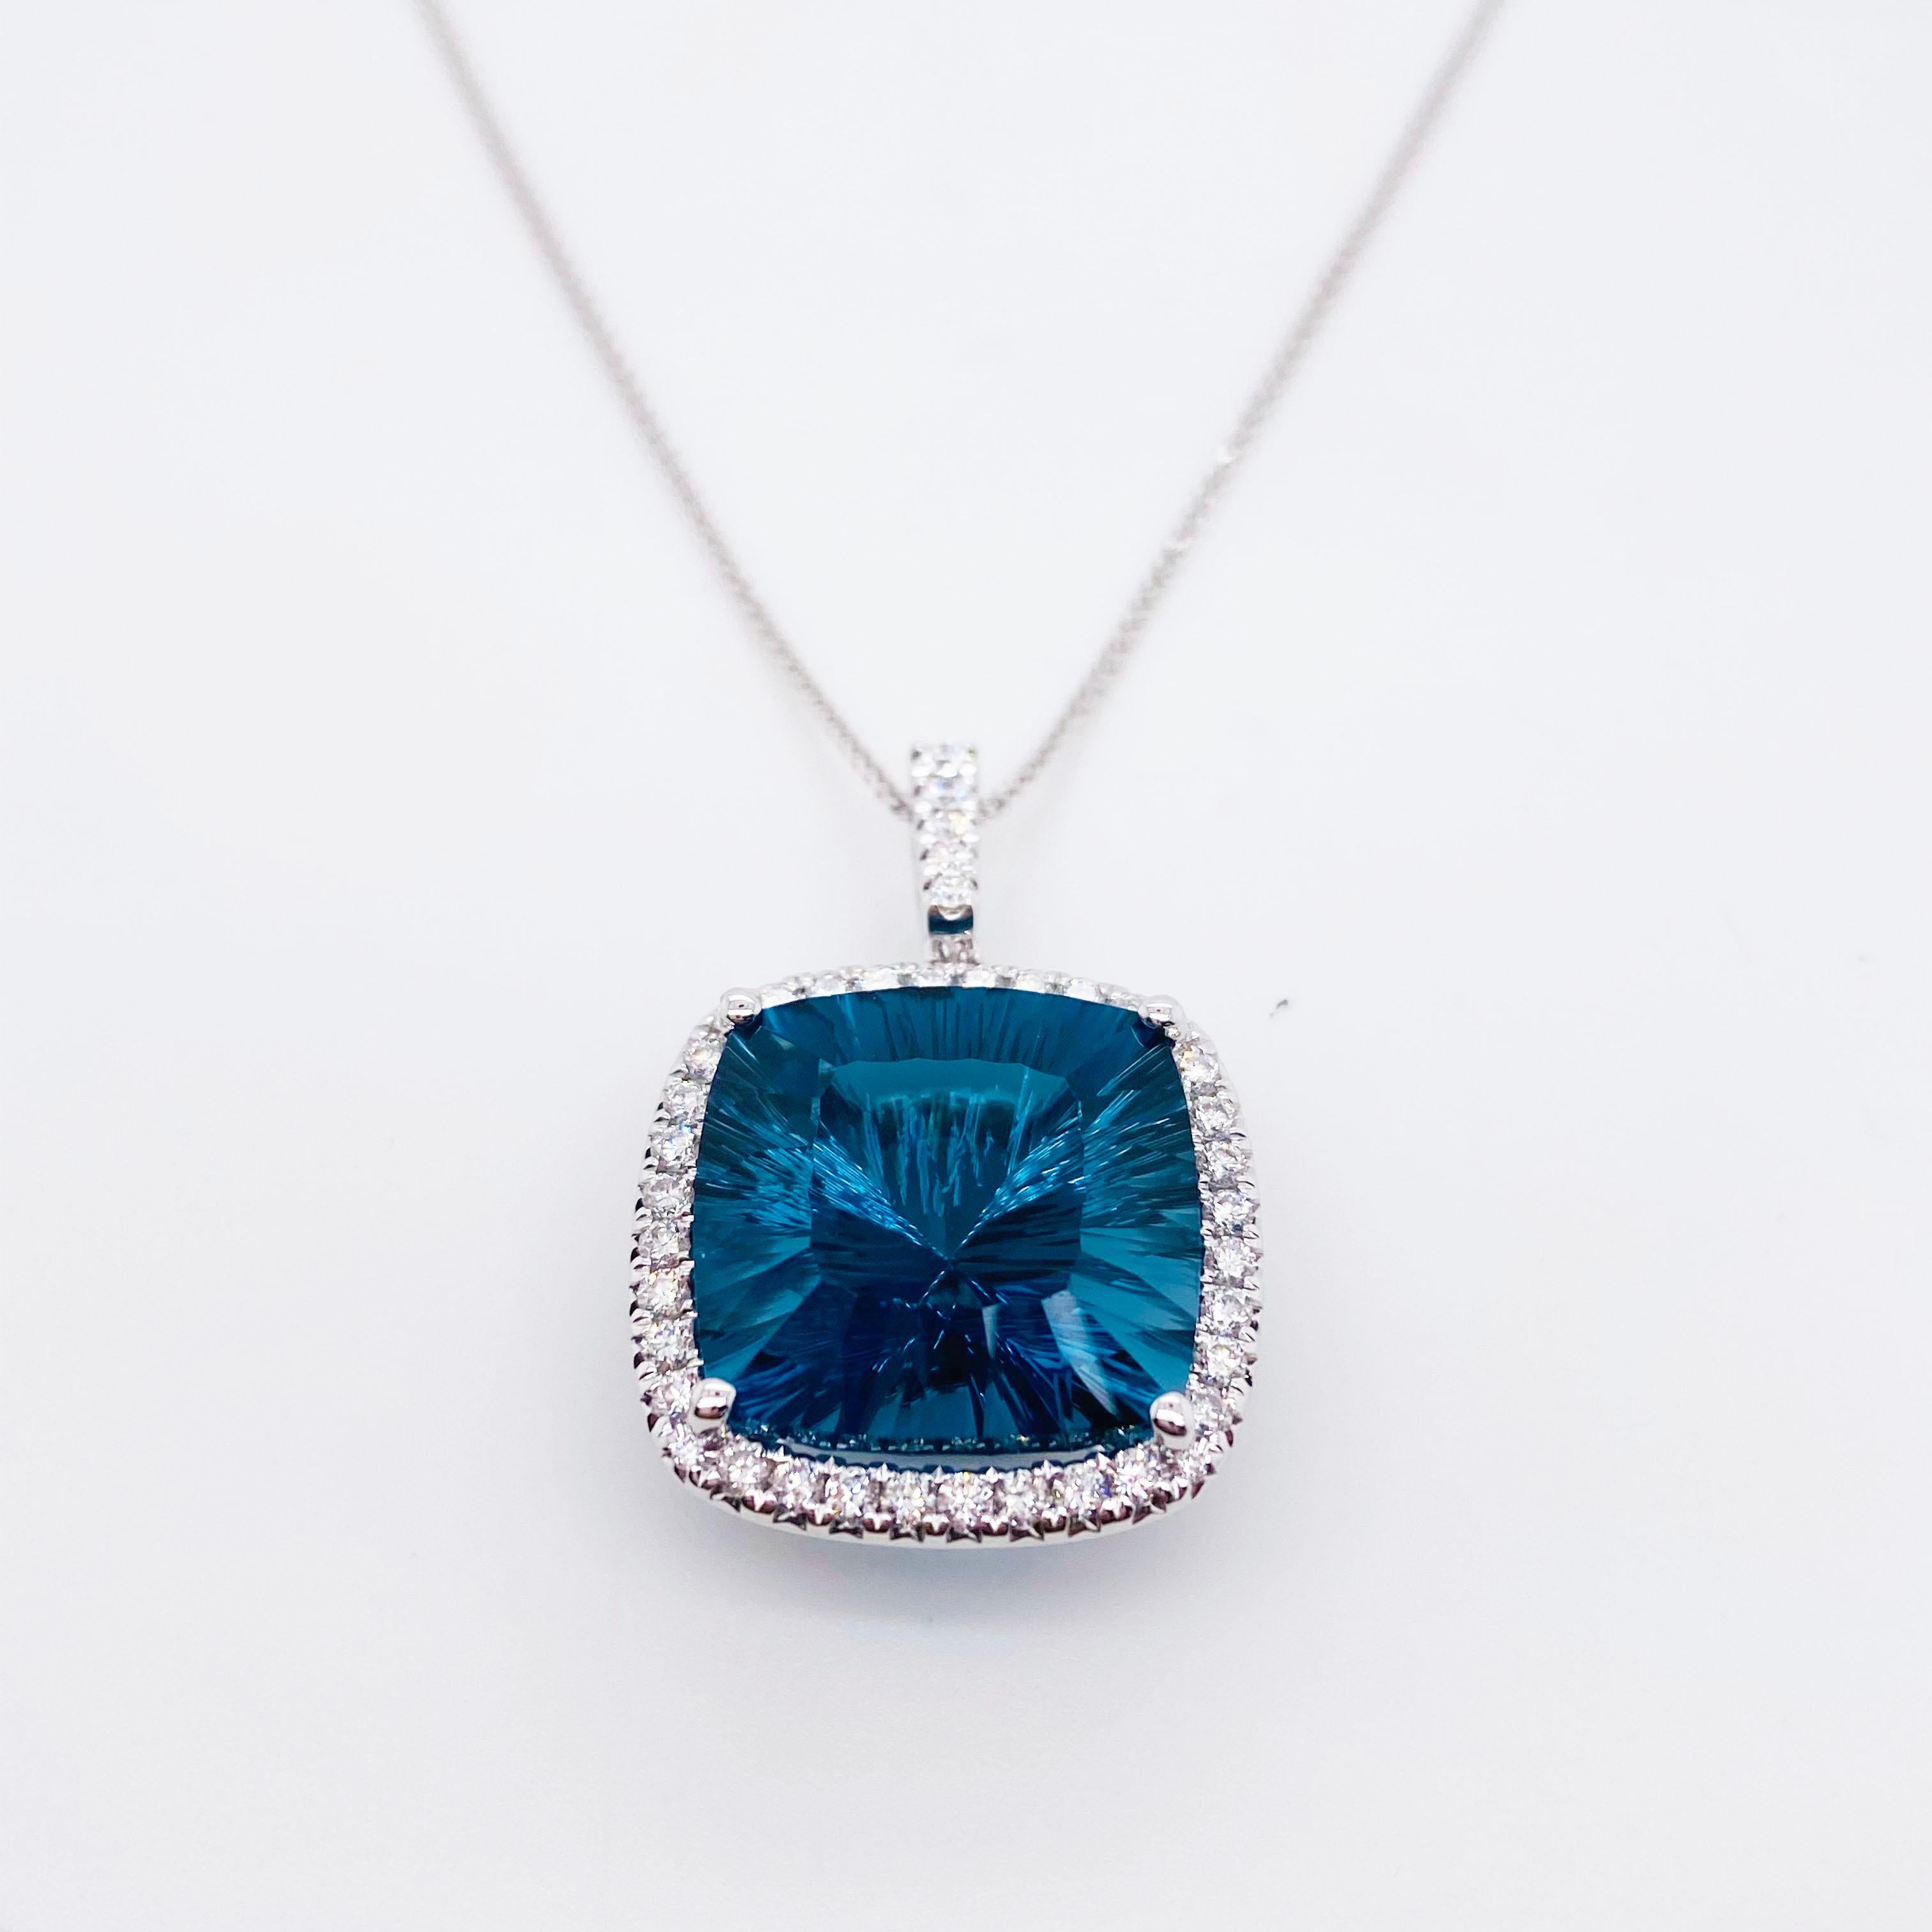 This Brazilian Fantasy Gemstone was very carefully cut by a well known cutter in Brazil. The London Blue Topaz is so sleek and has amazing reflections. The gemstone is outlined by the row of diamonds and the diamonds on the bail and set beautifully